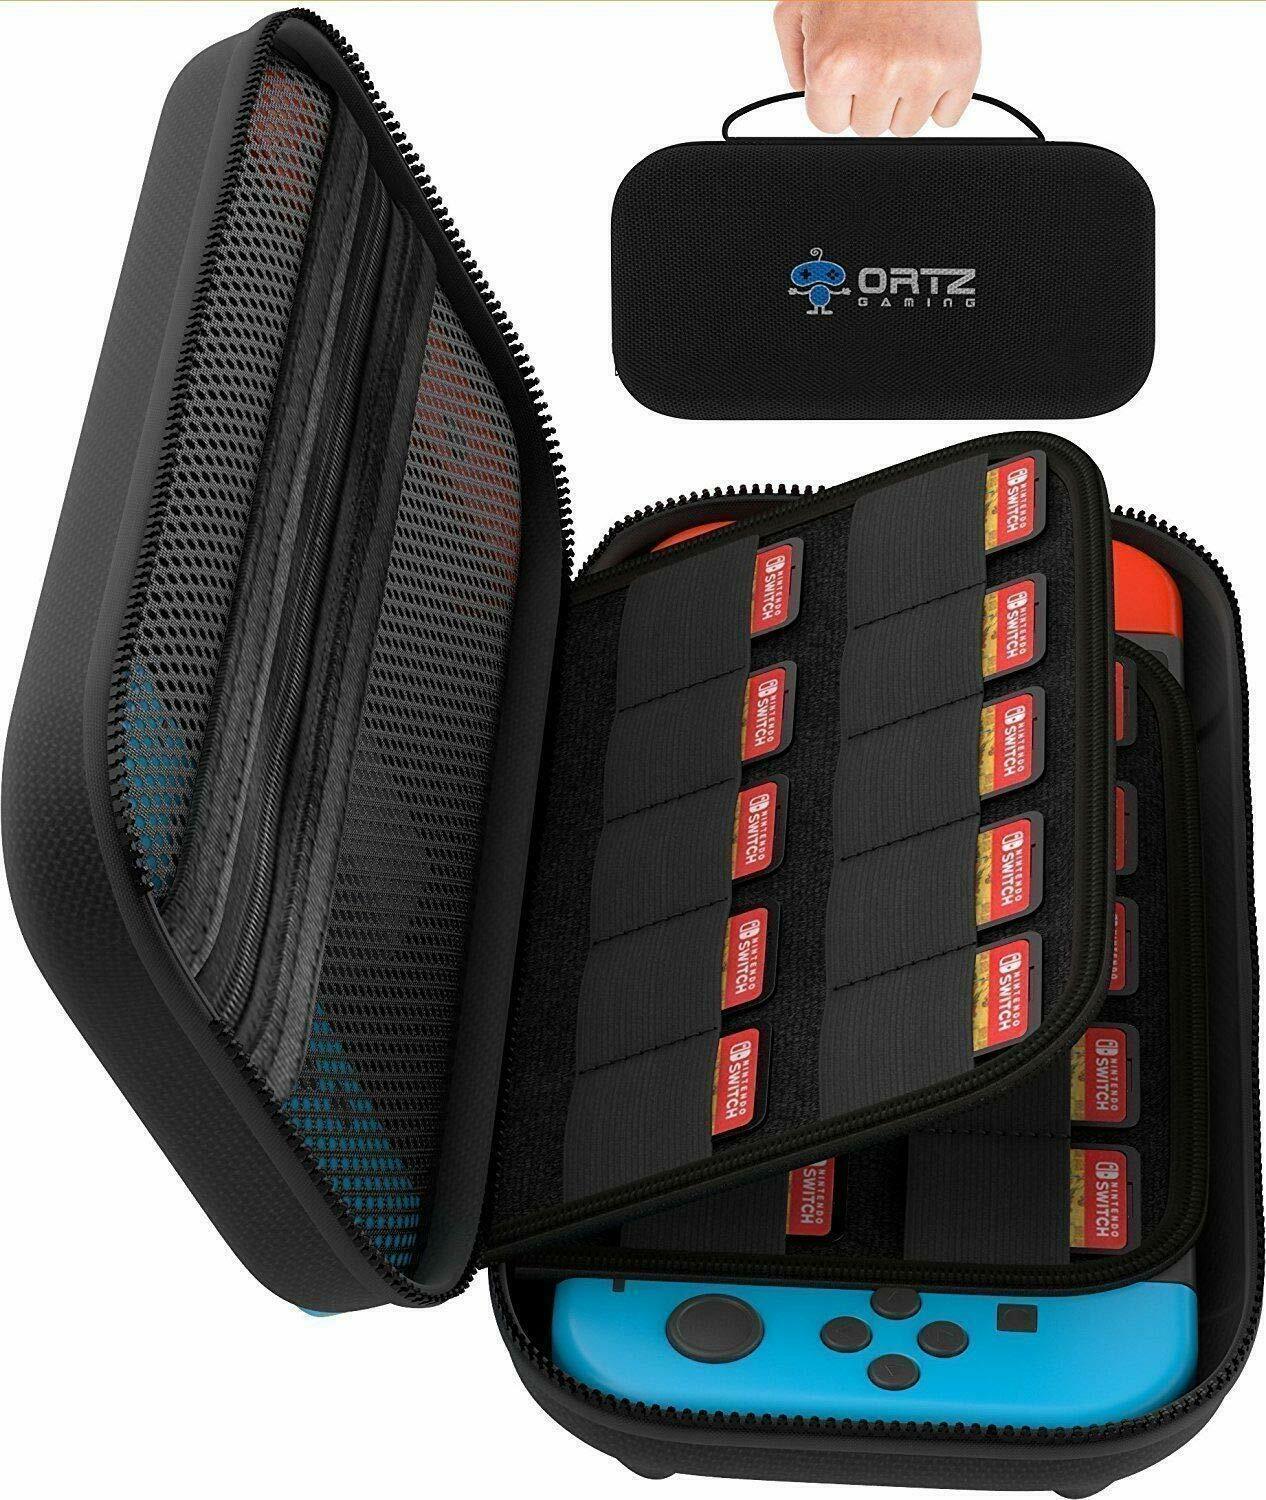 Ortz Carry Case for Nintendo Switch [Stores 29 Games] Protective